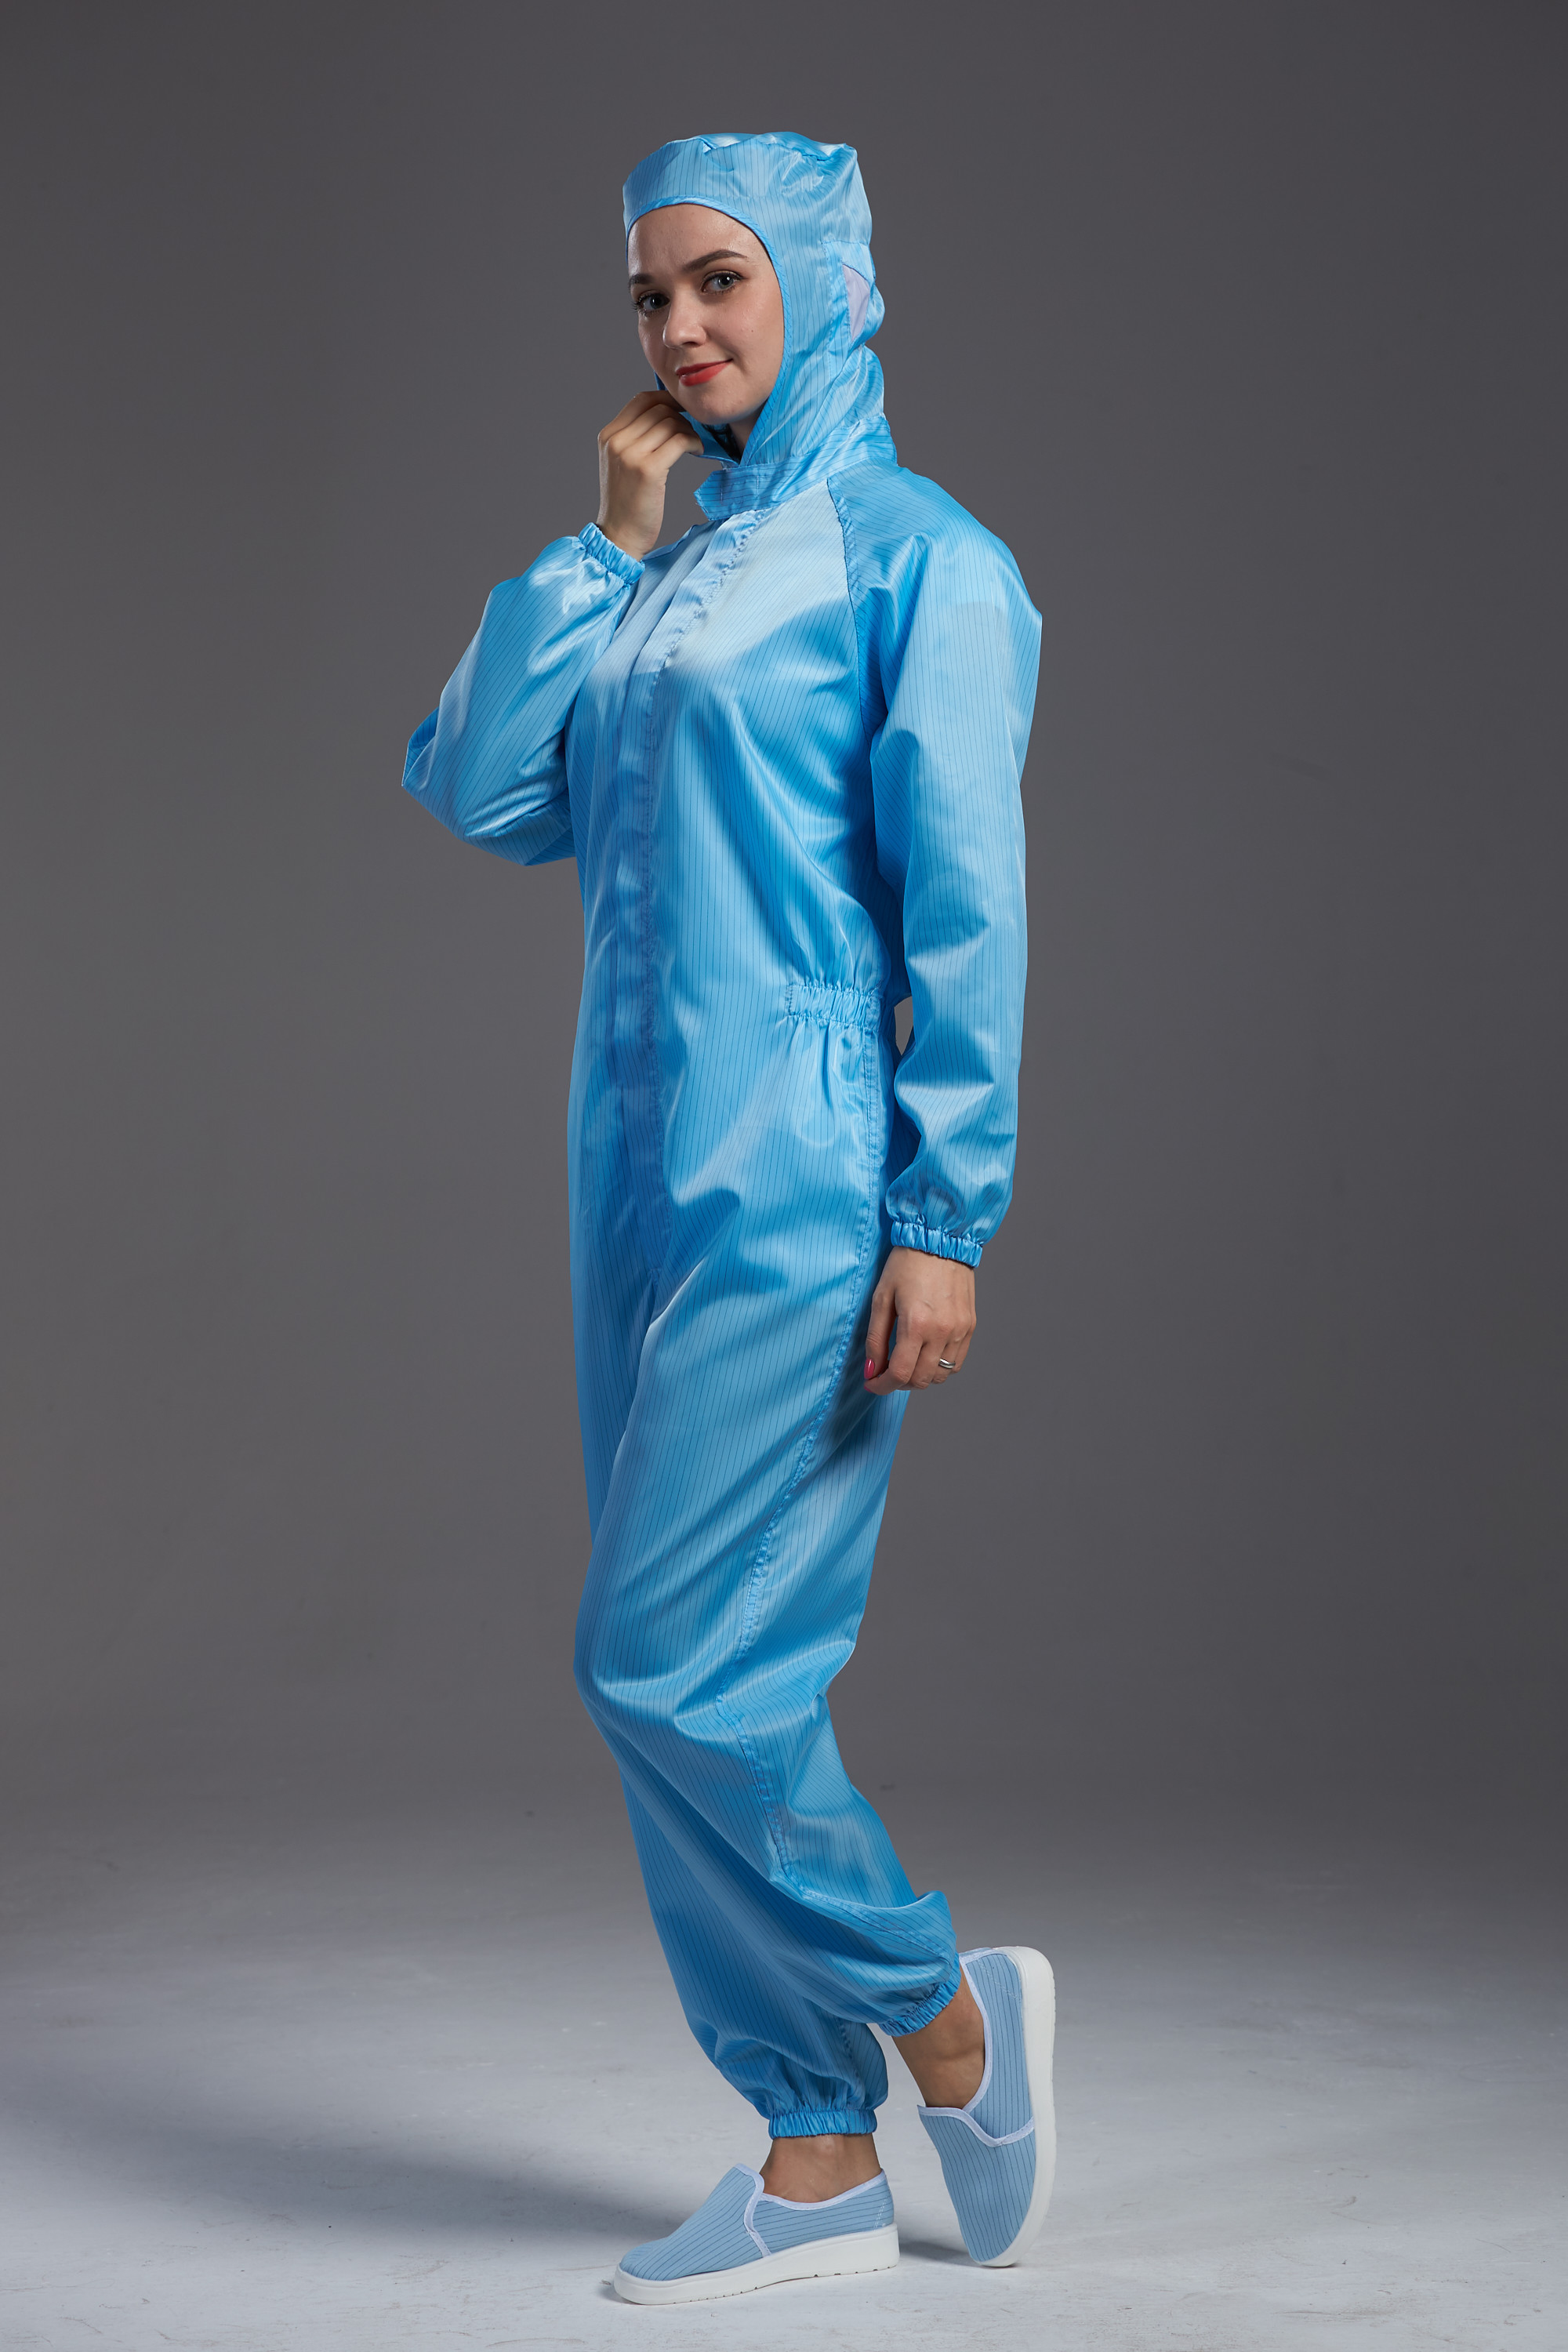 Best Cleanroom Garment Resuable Autoclave hooded Coverall small blue durable resuable in Pharmaceutical Workshop wholesale